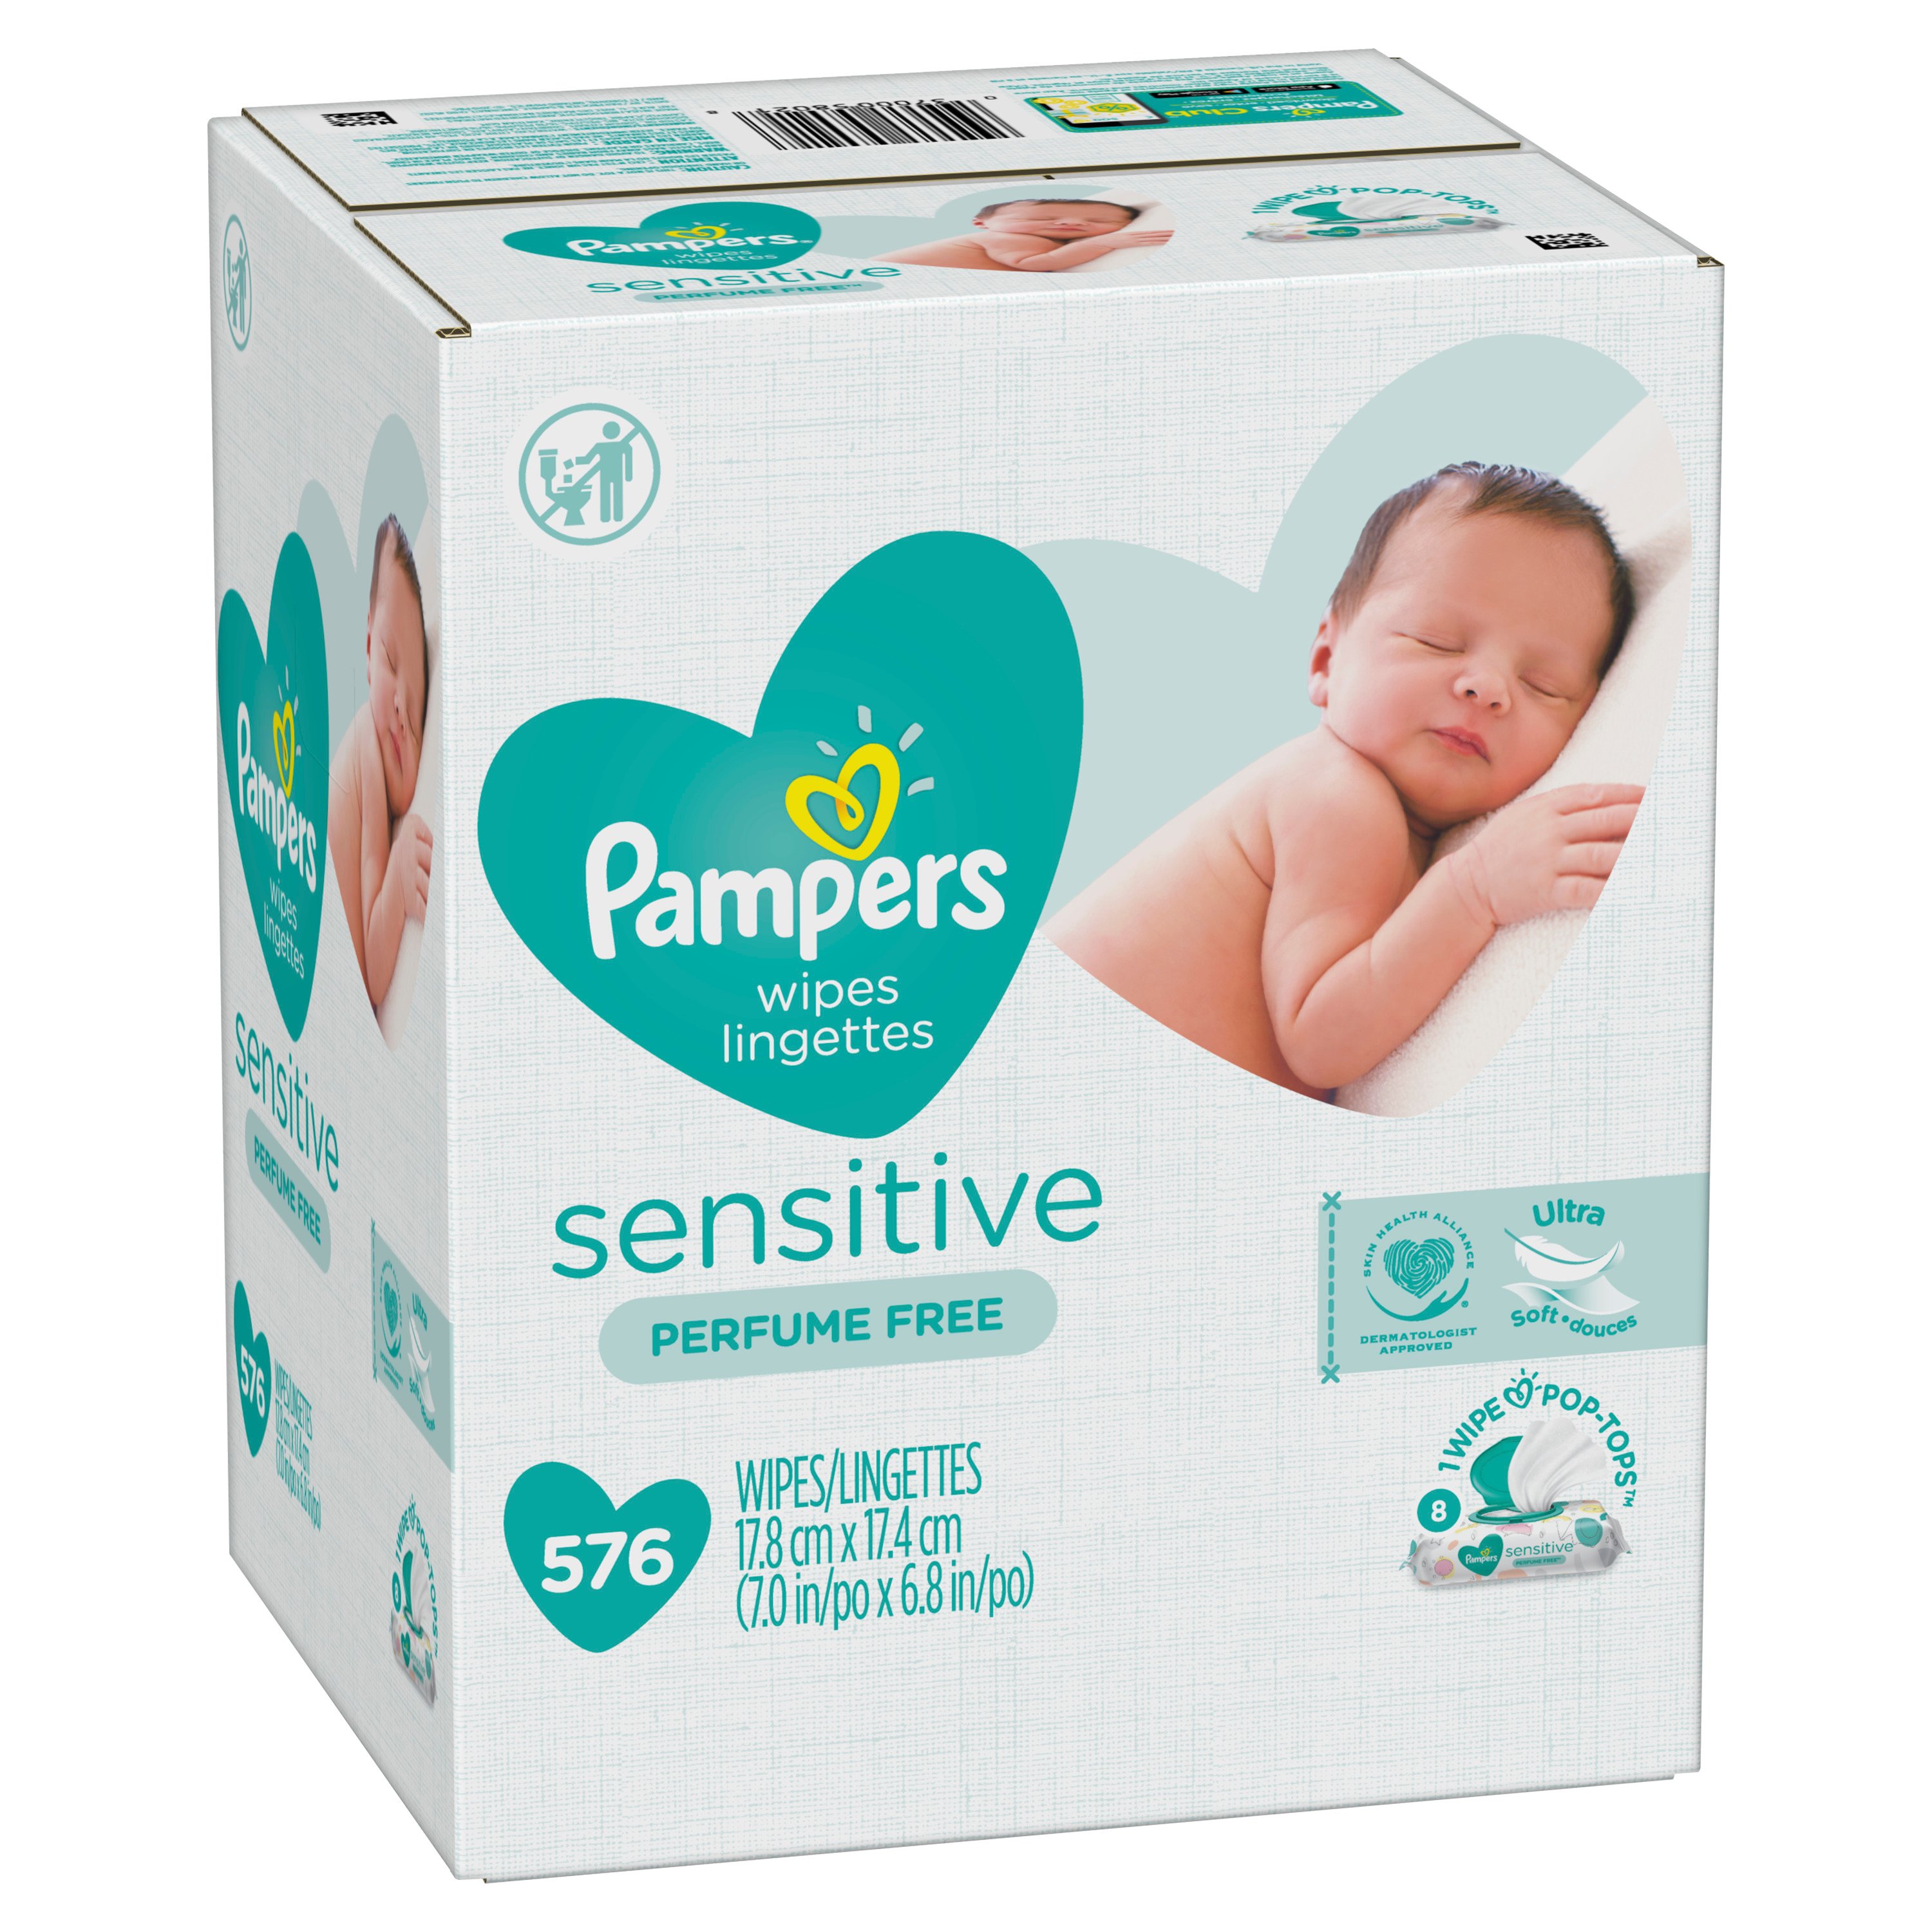 new baby sensitive pampers wipes